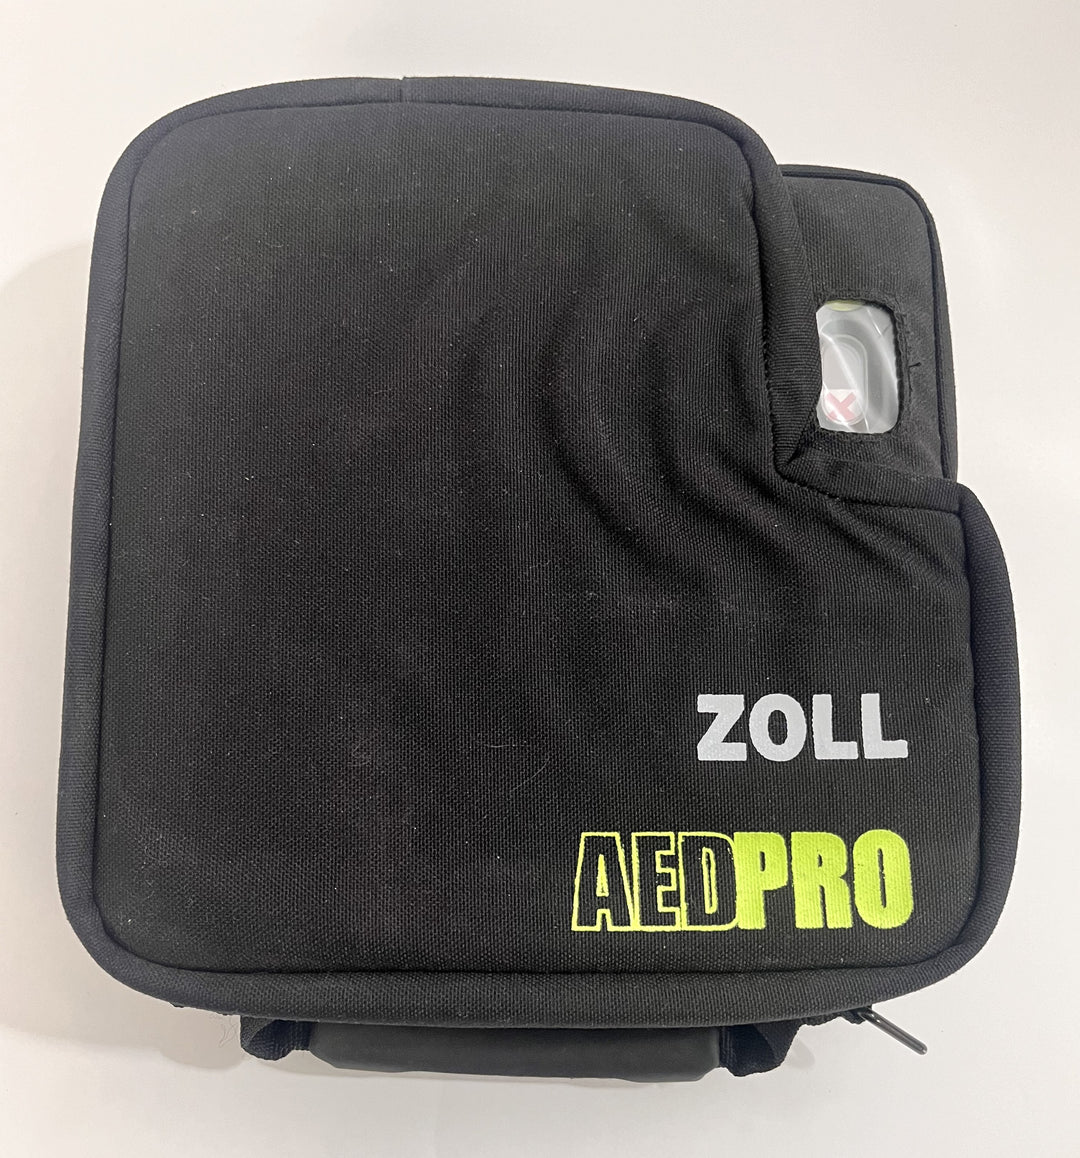 Zoll AED Pro Defibrillator with Carry Case